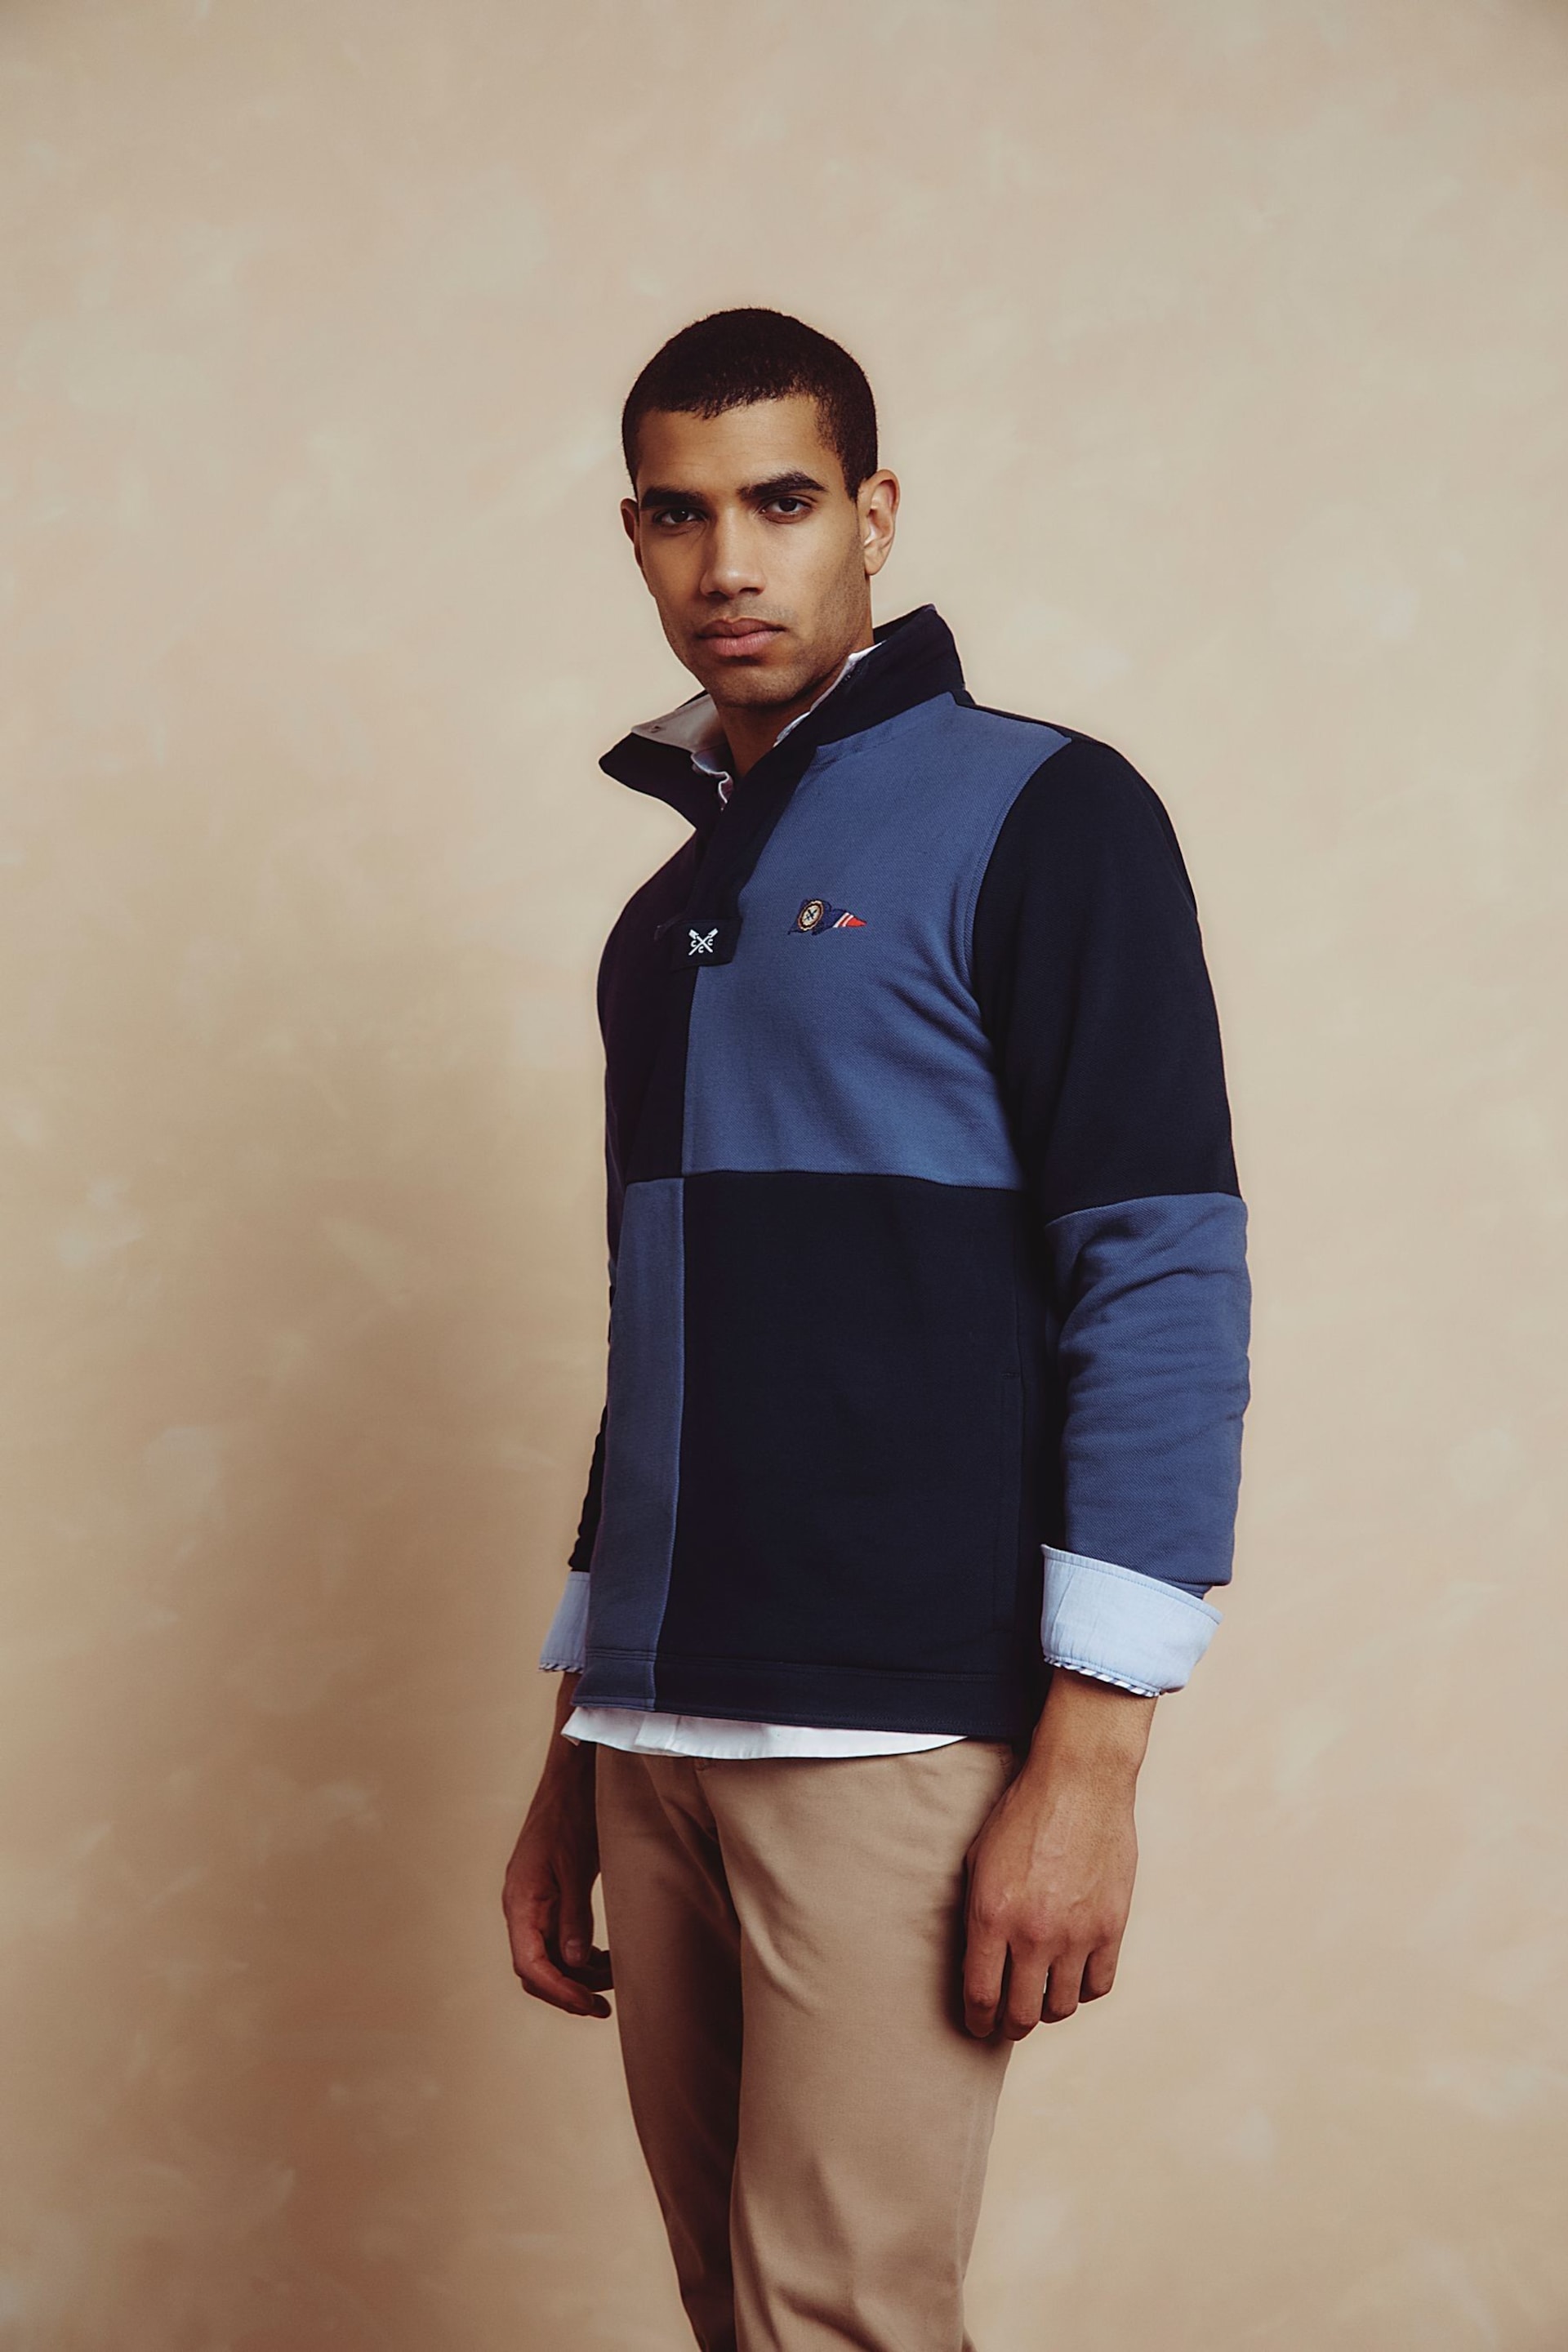 Crew Clothing Cut and Sew Padstow Sweatshirt - Image 1 of 4